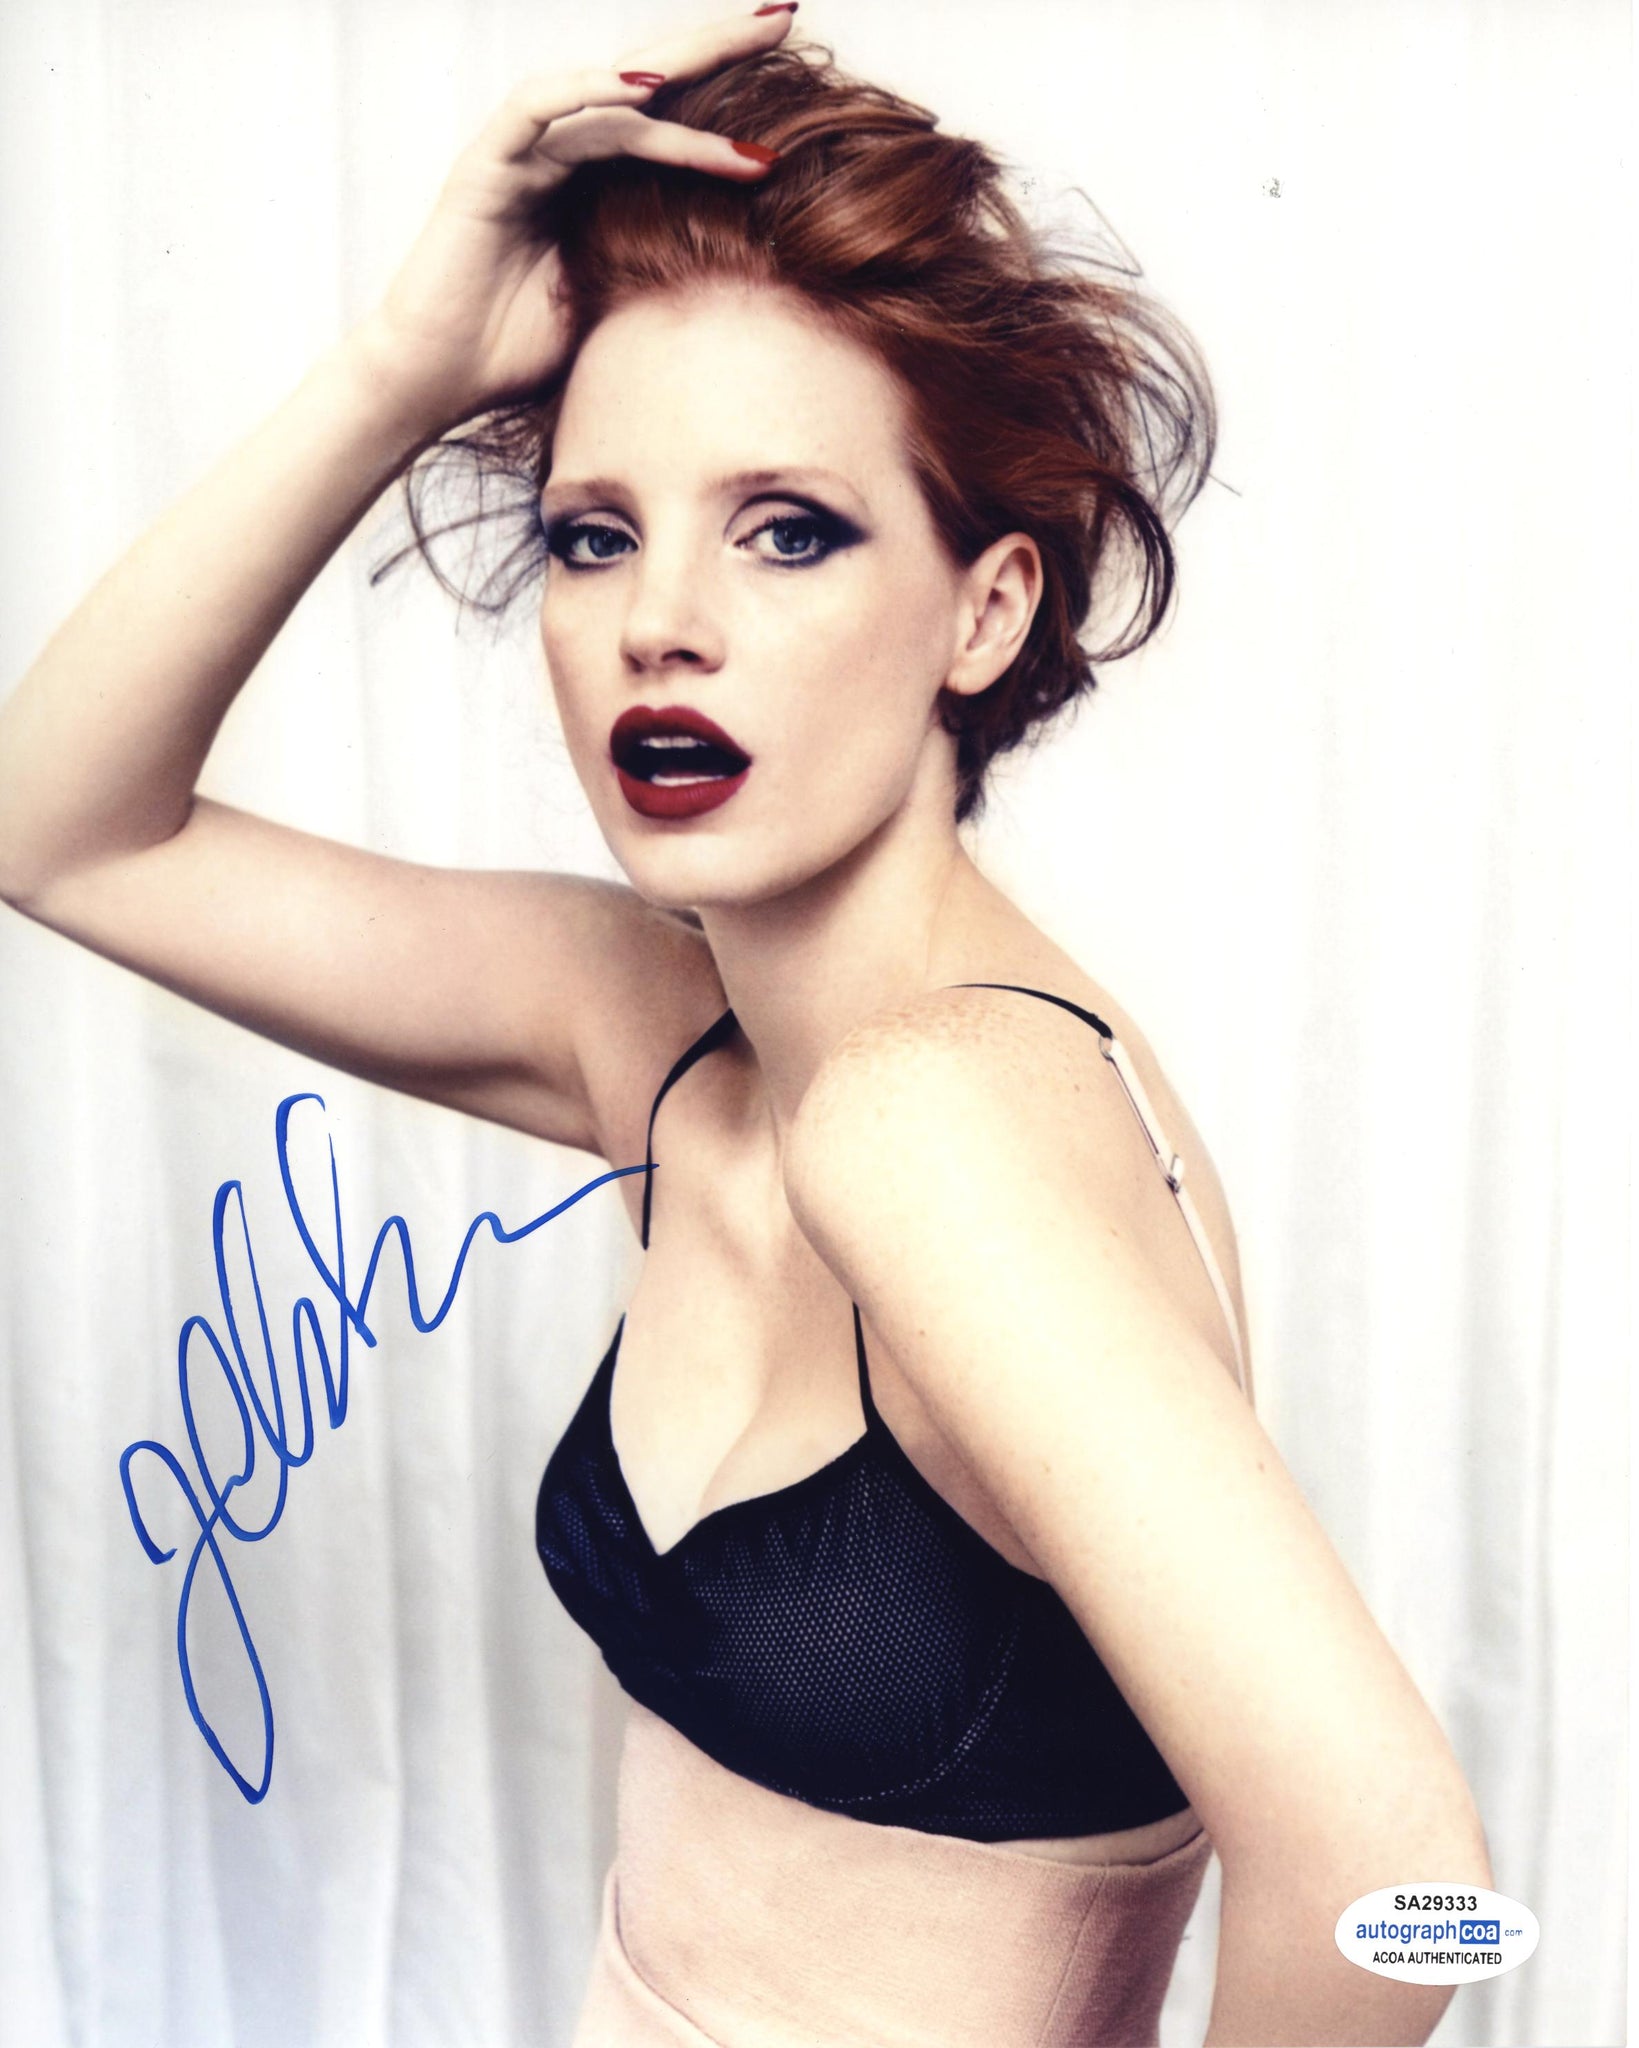 Jessica Chastain Sexy Signed Autograph 8x10 Photo ACOA #4 - Outlaw Hobbies Authentic Autographs